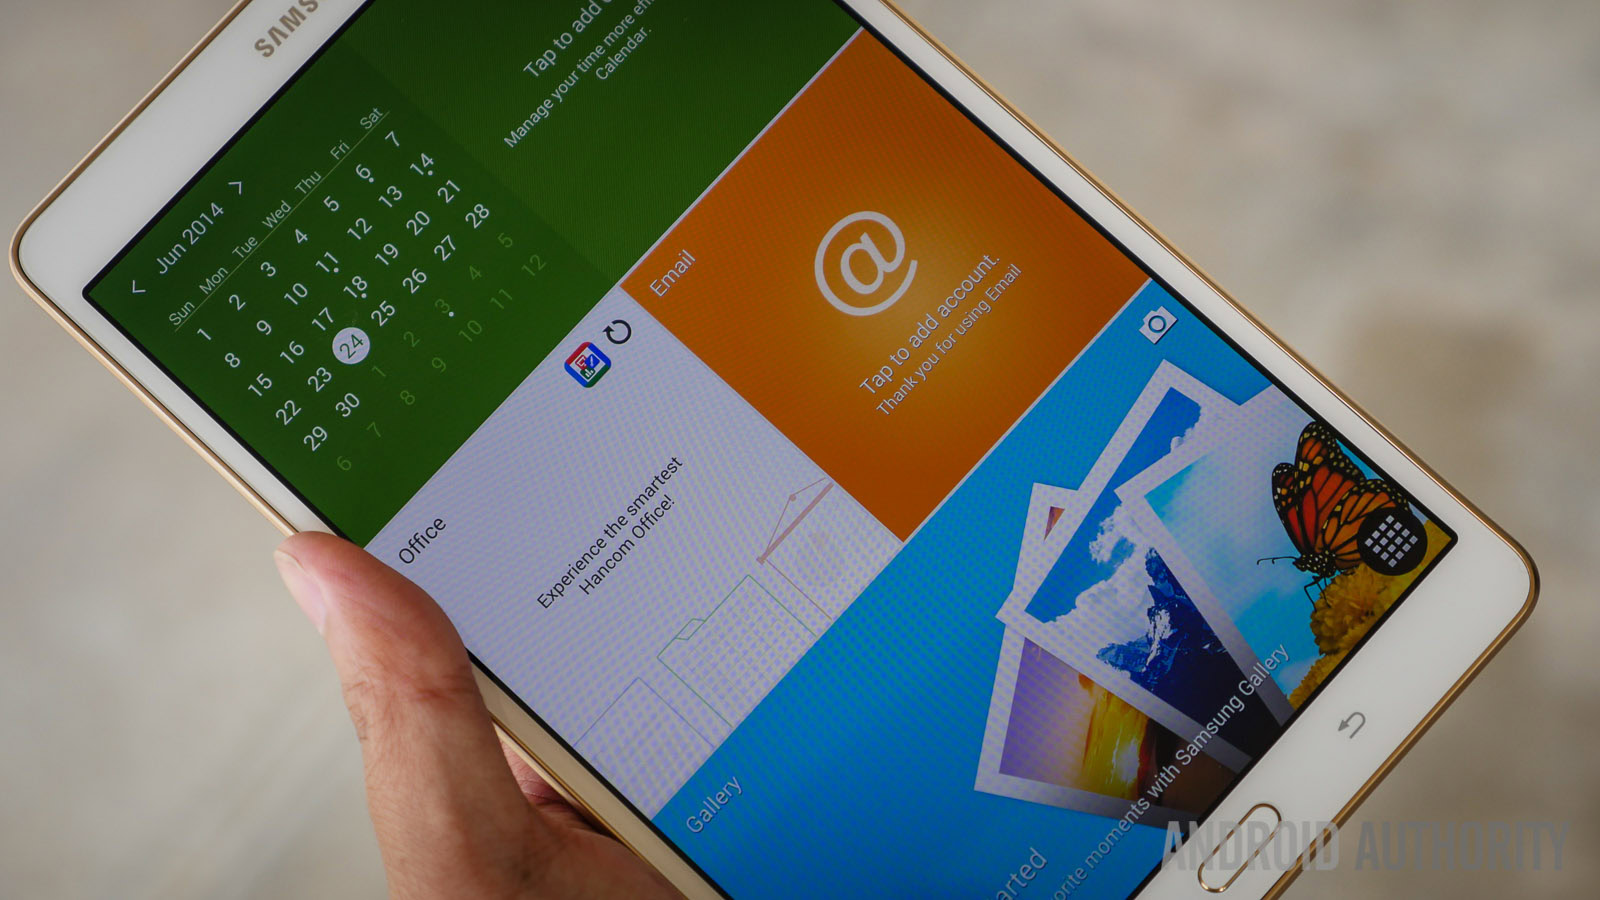 samsung galaxy tab s 8.4 review (17 of 27)